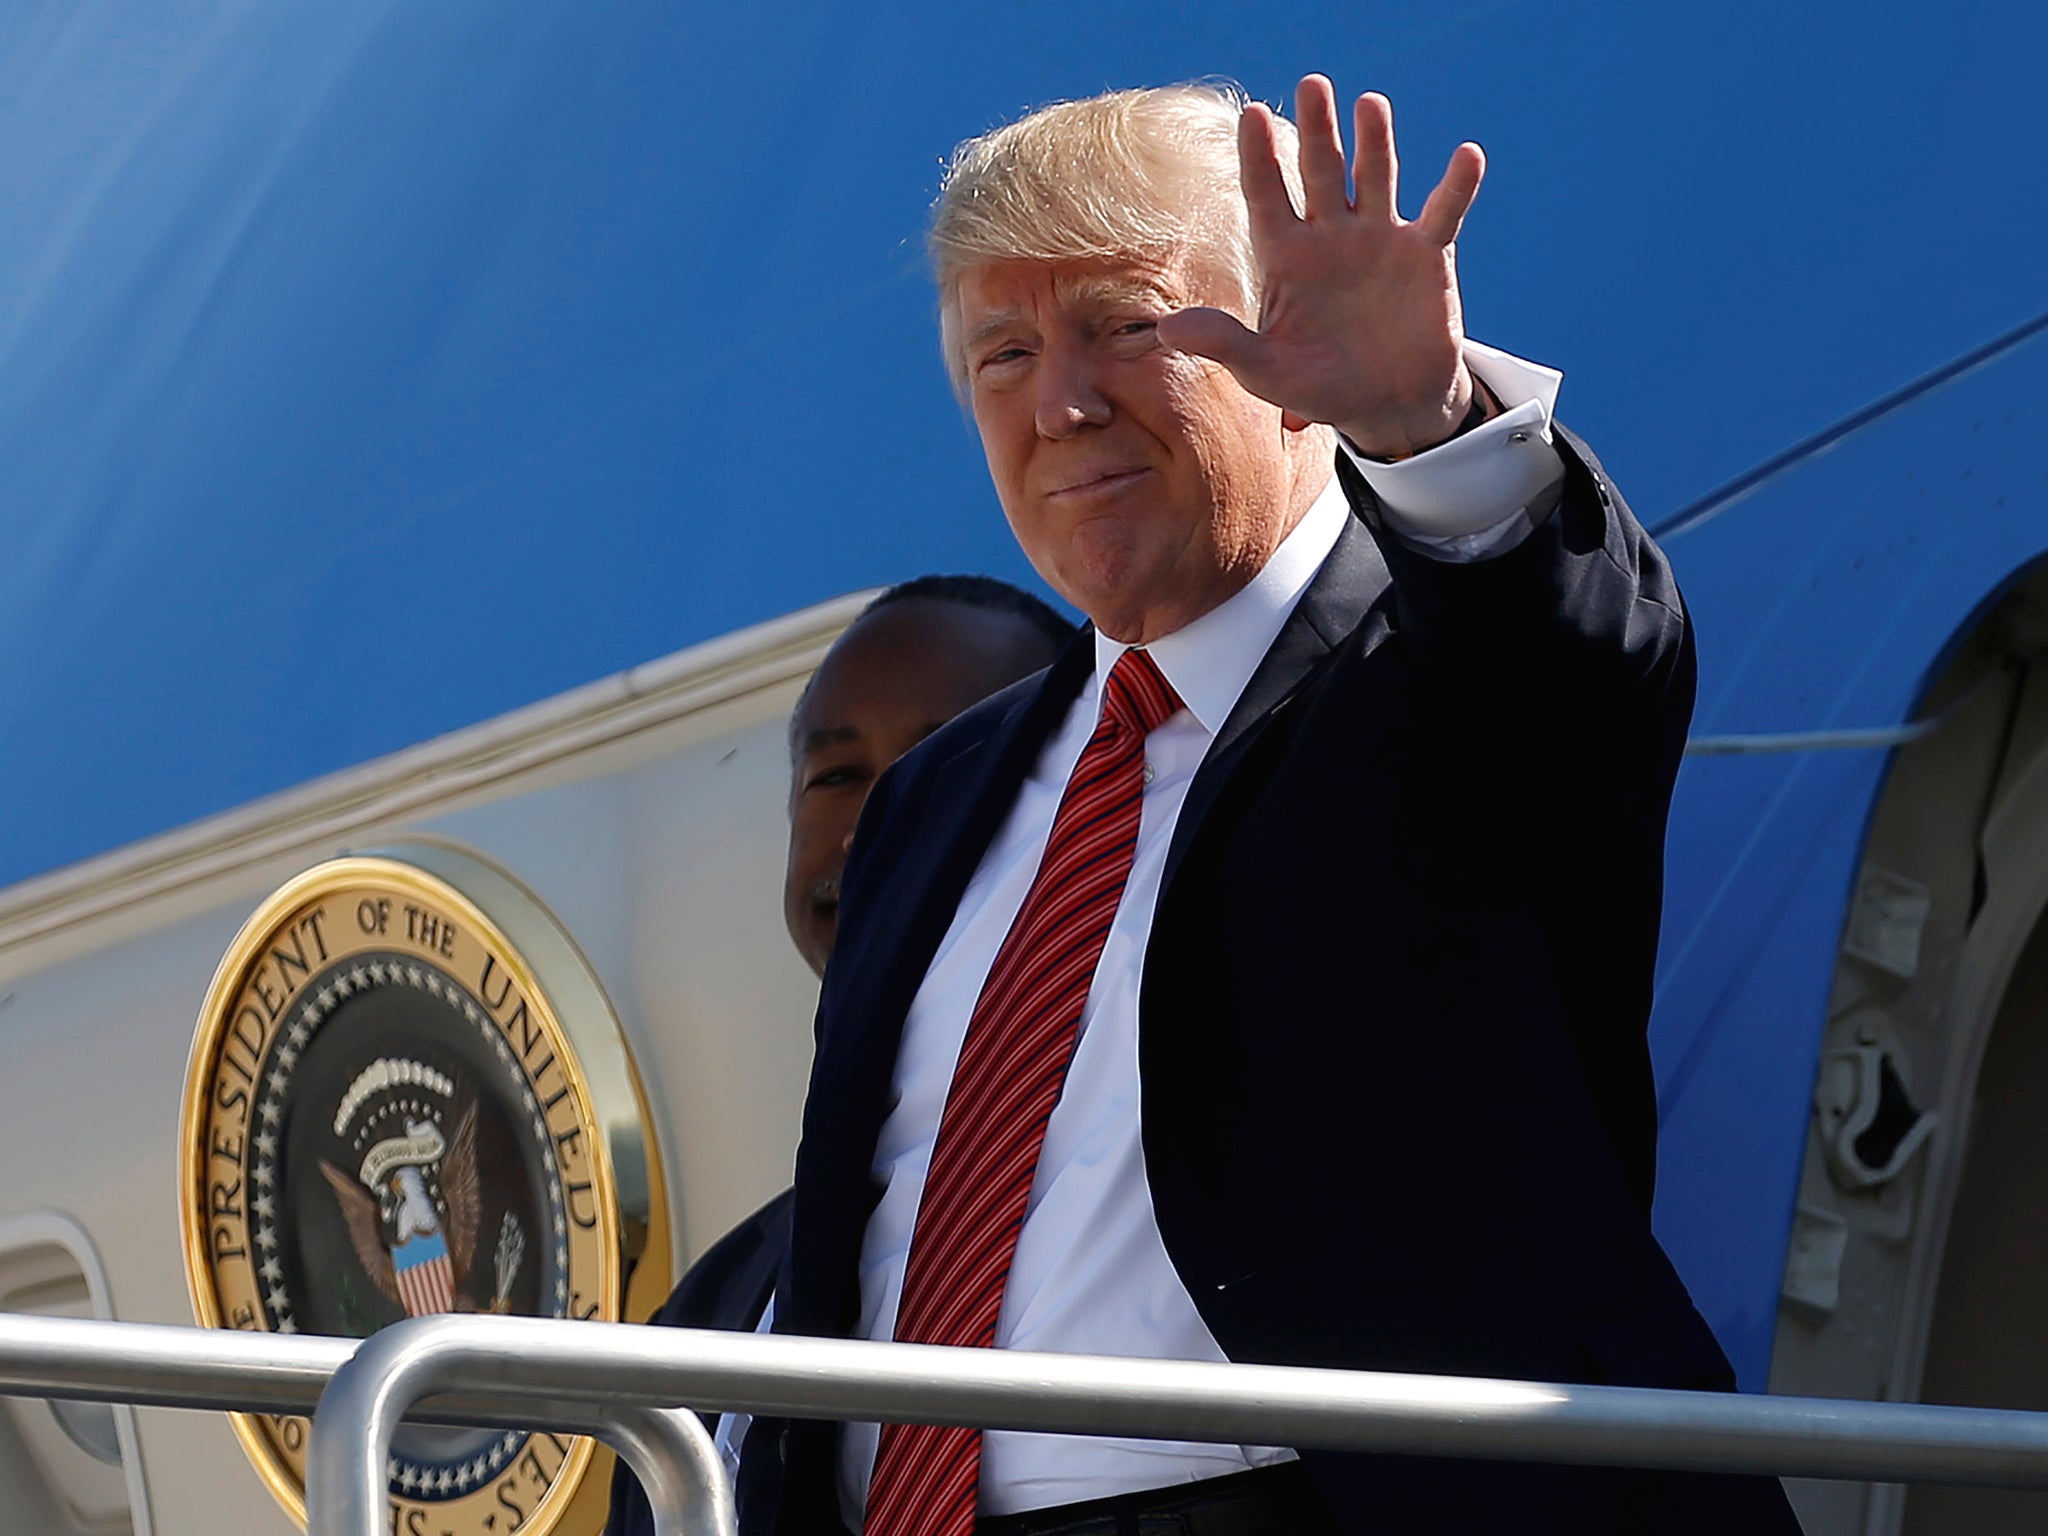 President Donald Trump waves as he steps out from Air Force One in Reno, Nevada